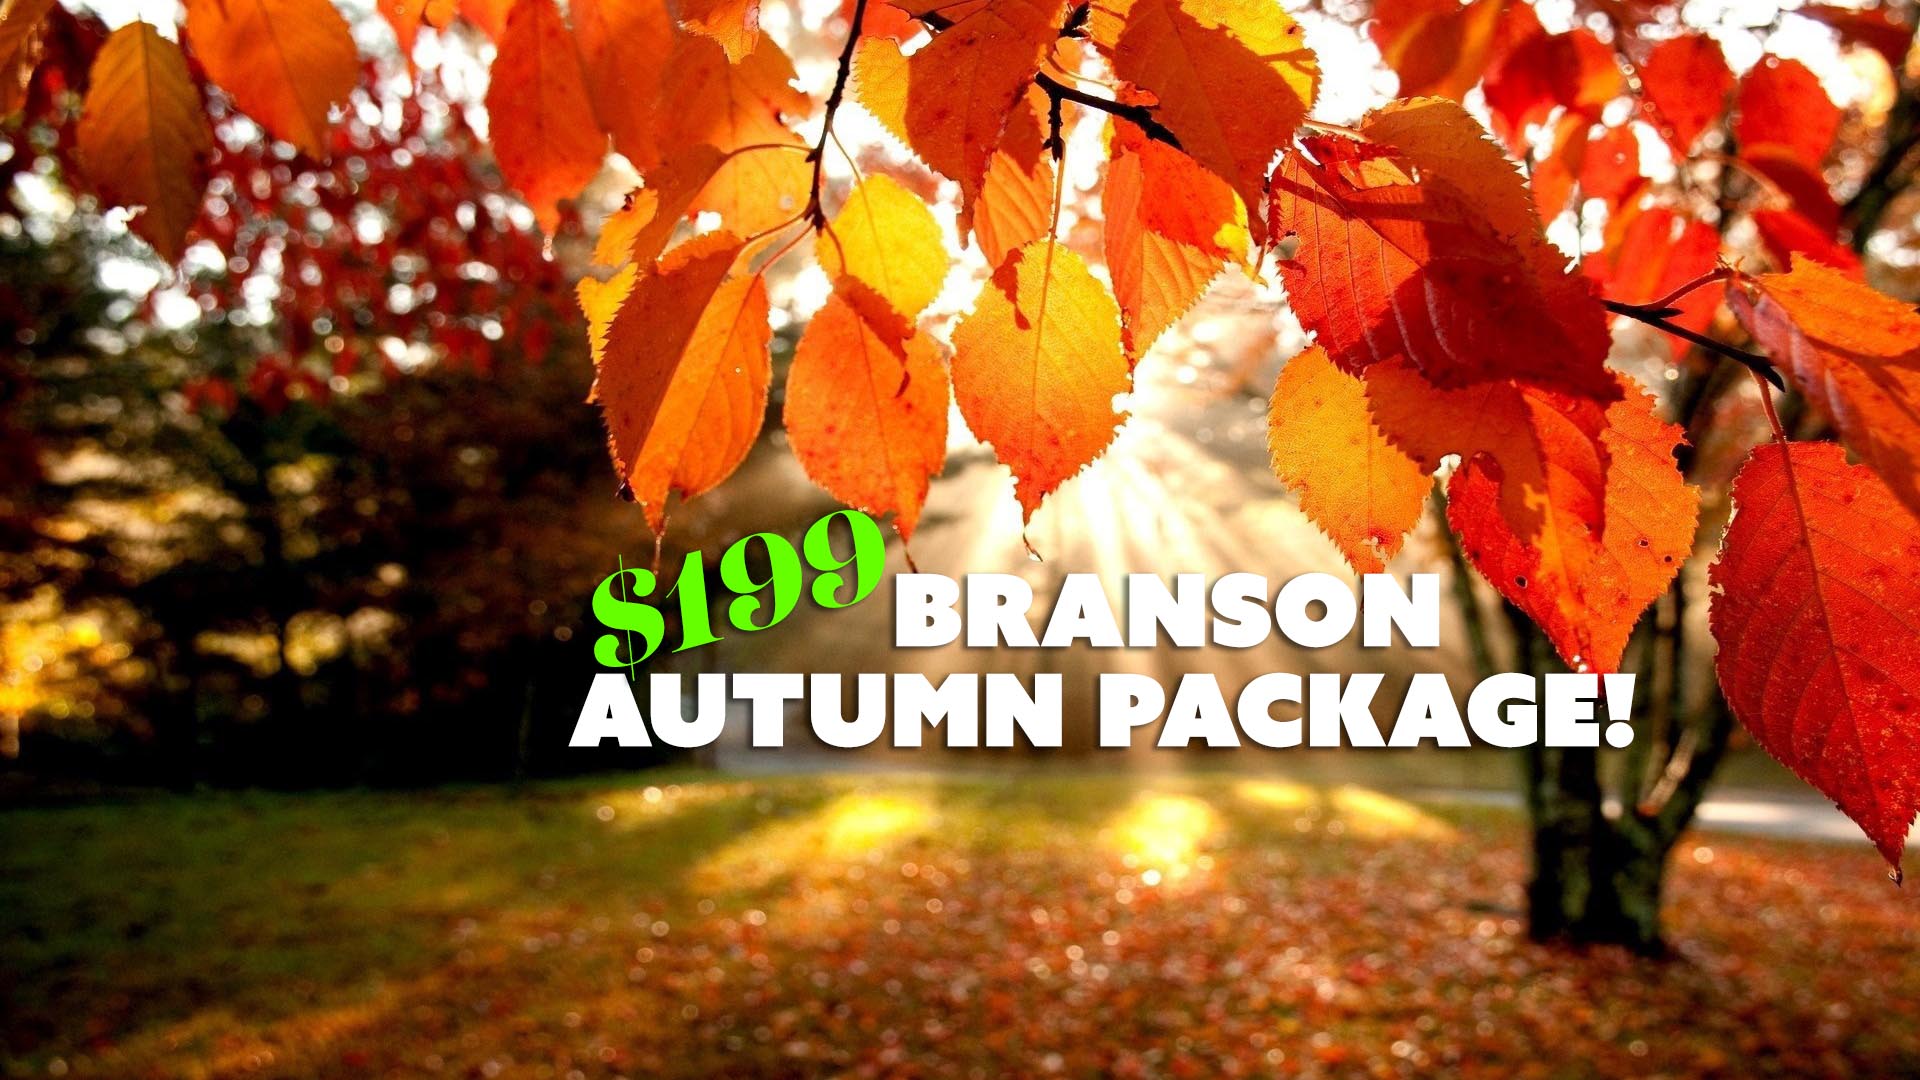 $199 Fall Vacation Package to Branson